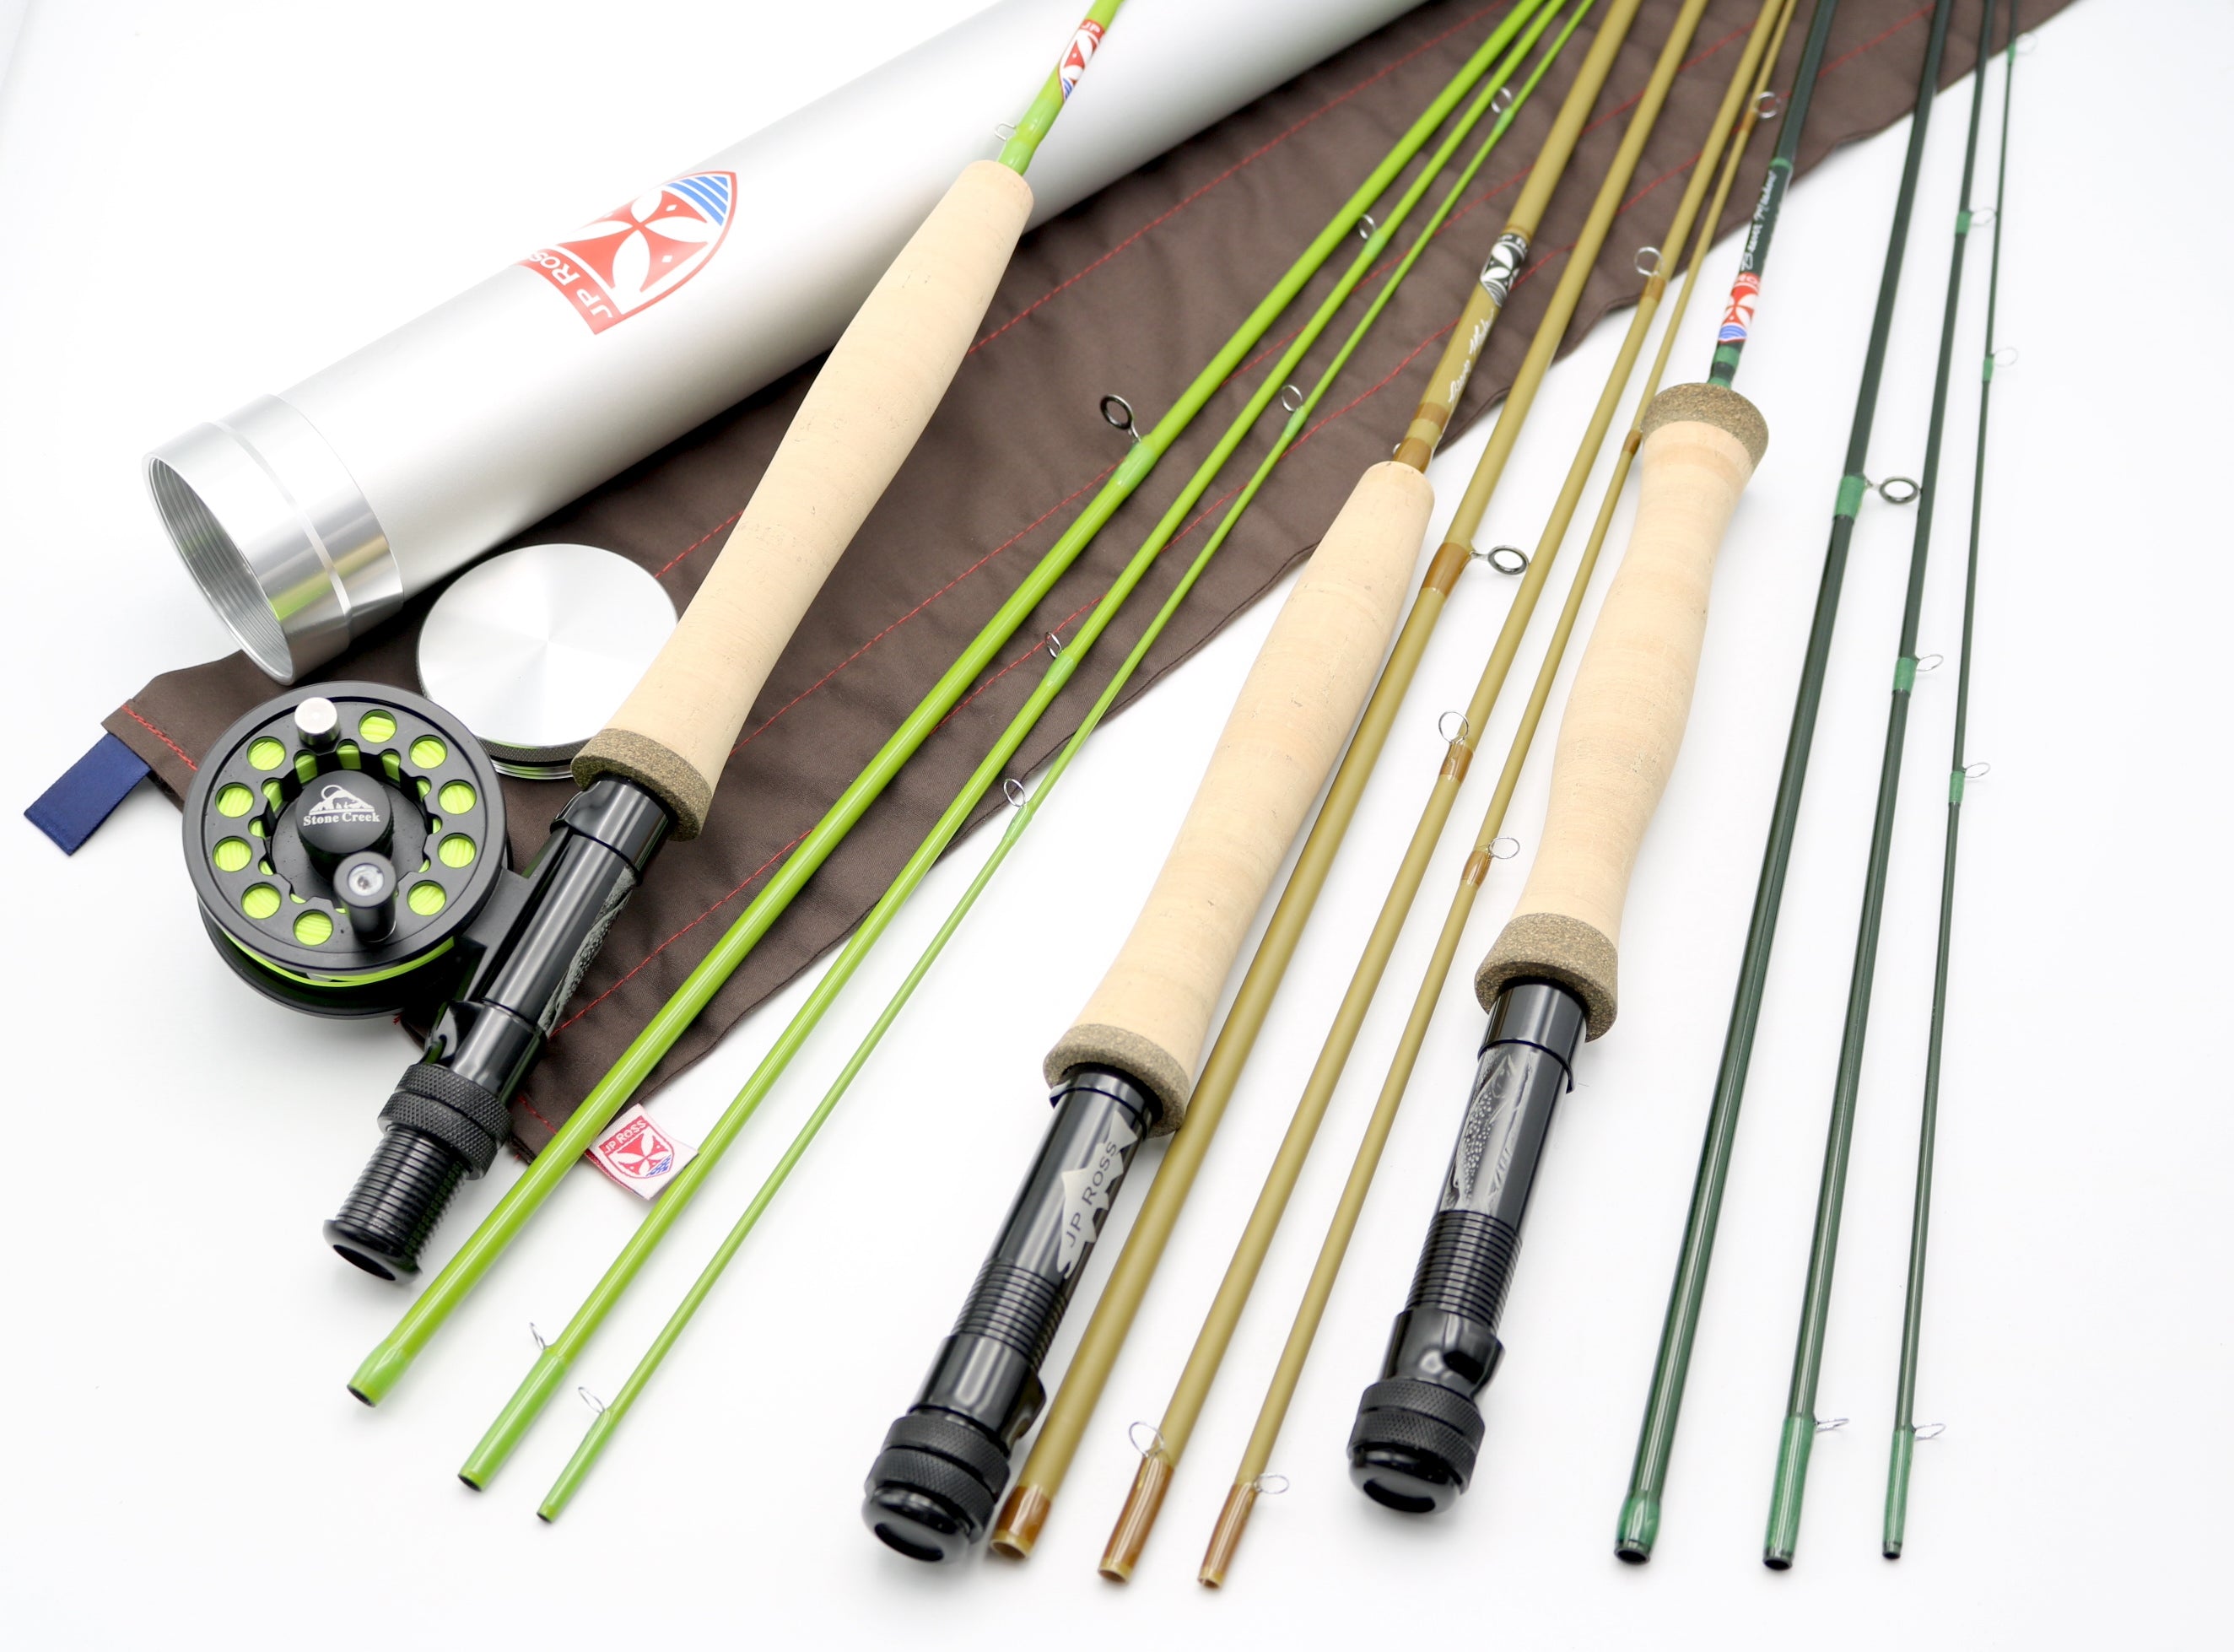 Beaver Meadow Adams Rod and Outfits, refined, simple, & value